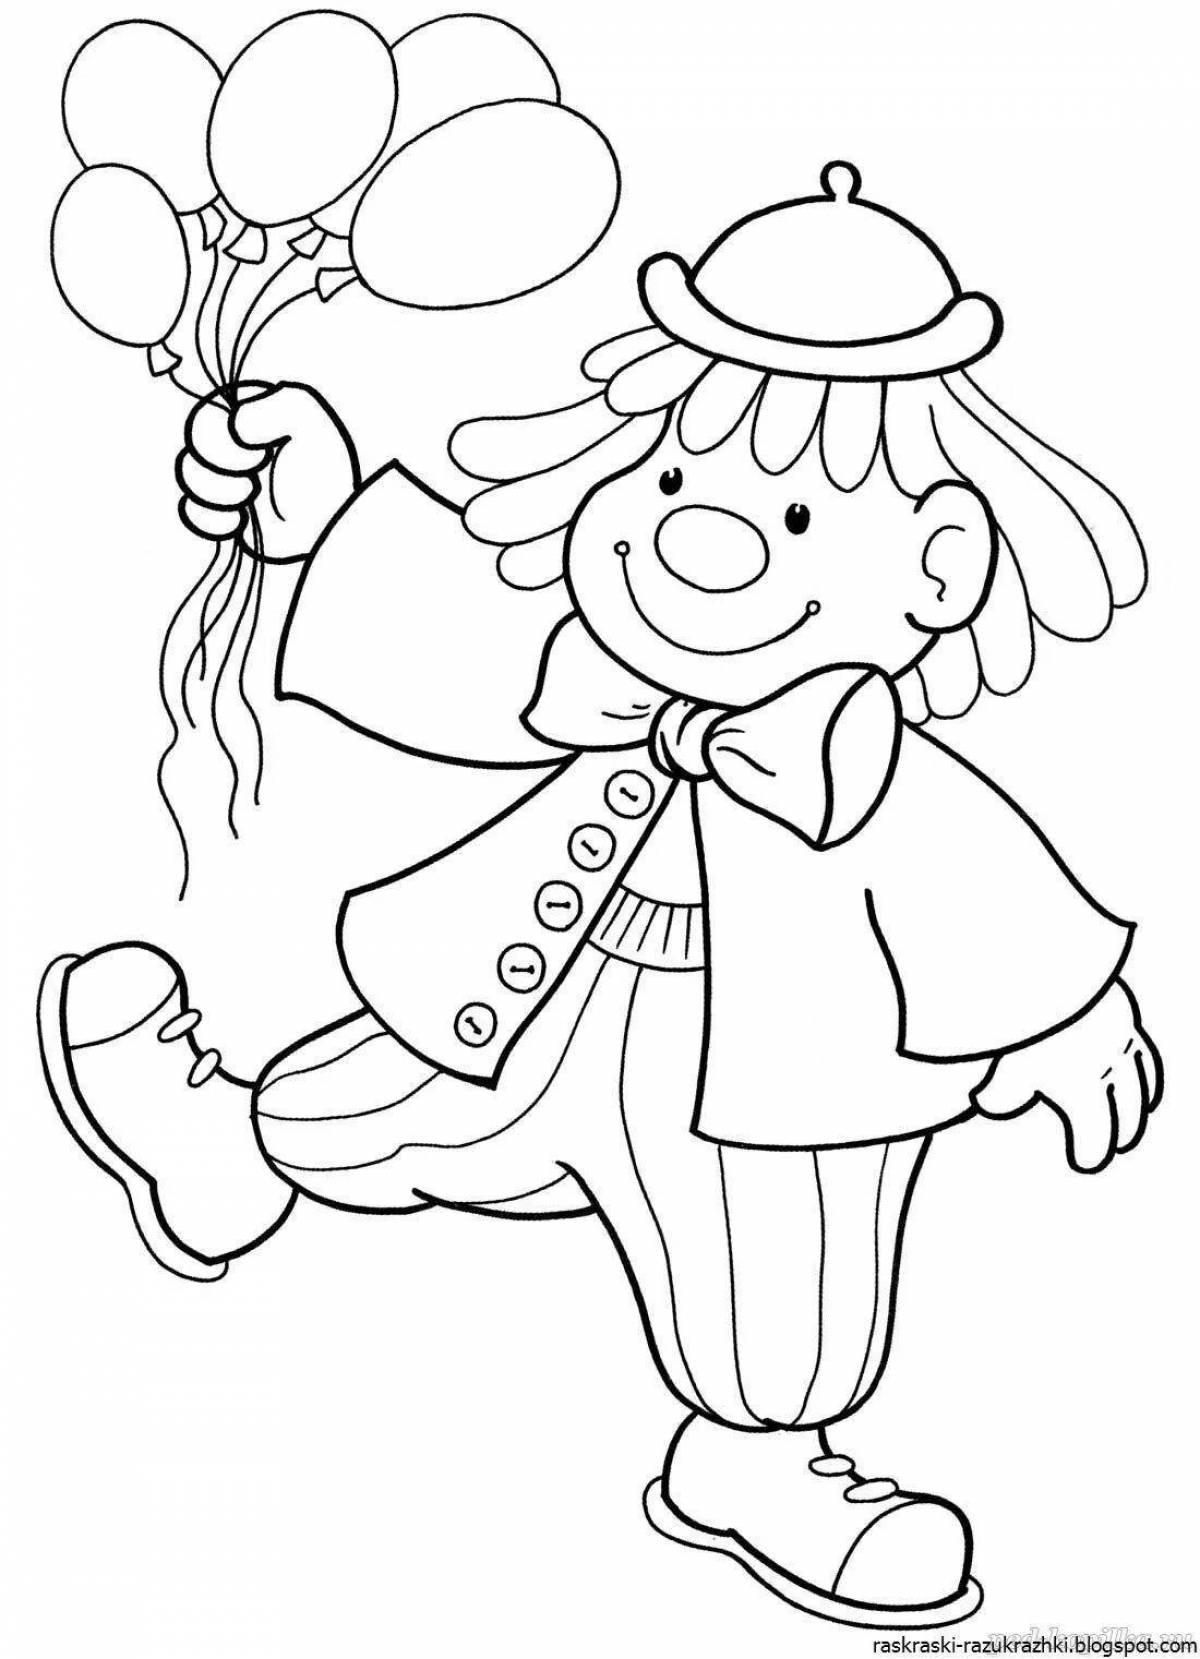 Adorable buffoon coloring page for kids